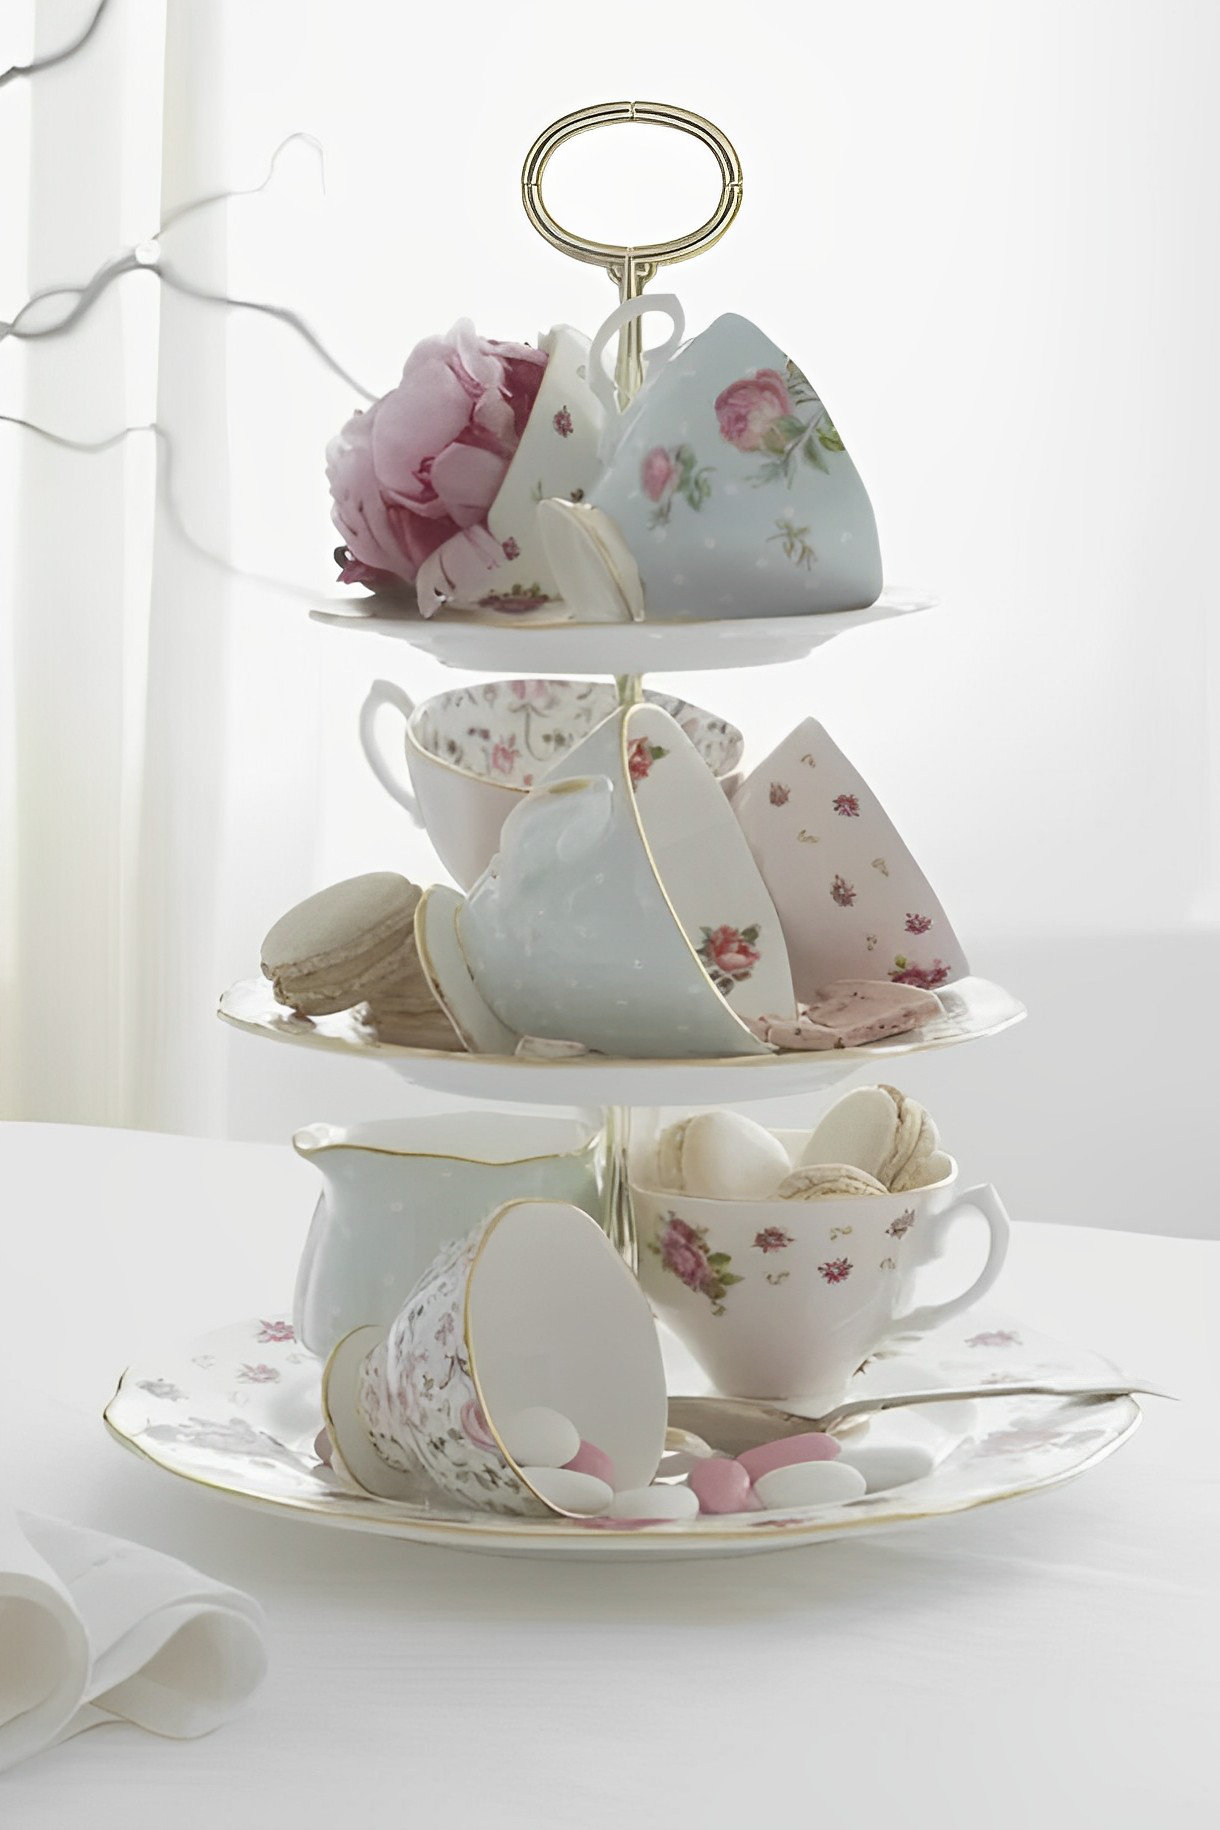 Simply Elegant White and Gold Fluted Teacups - set of four